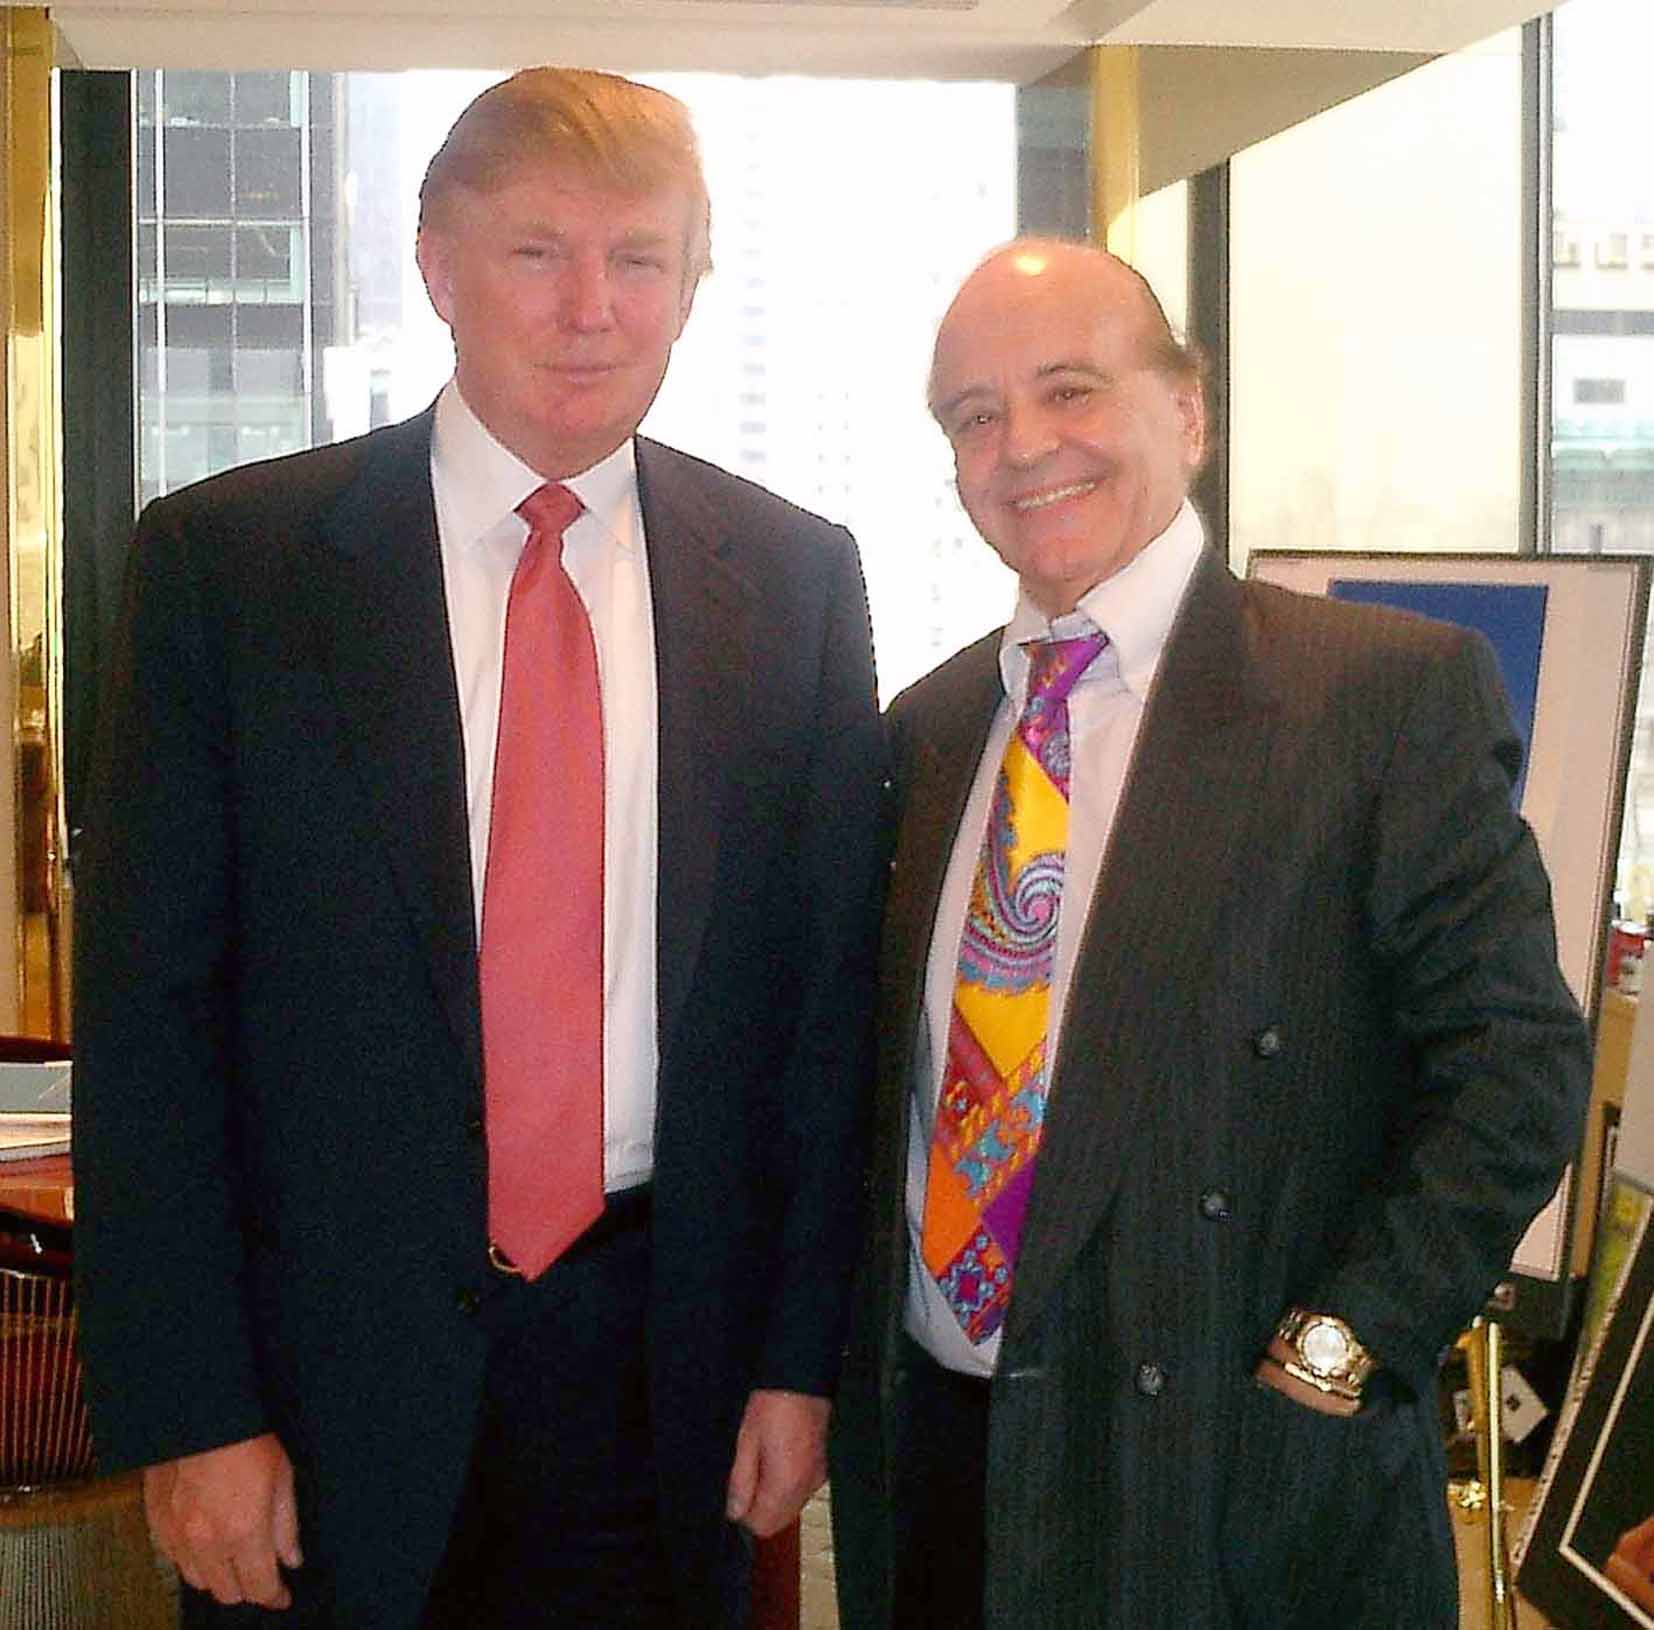 DONALD TRUMP with Jorg Bobsin for 